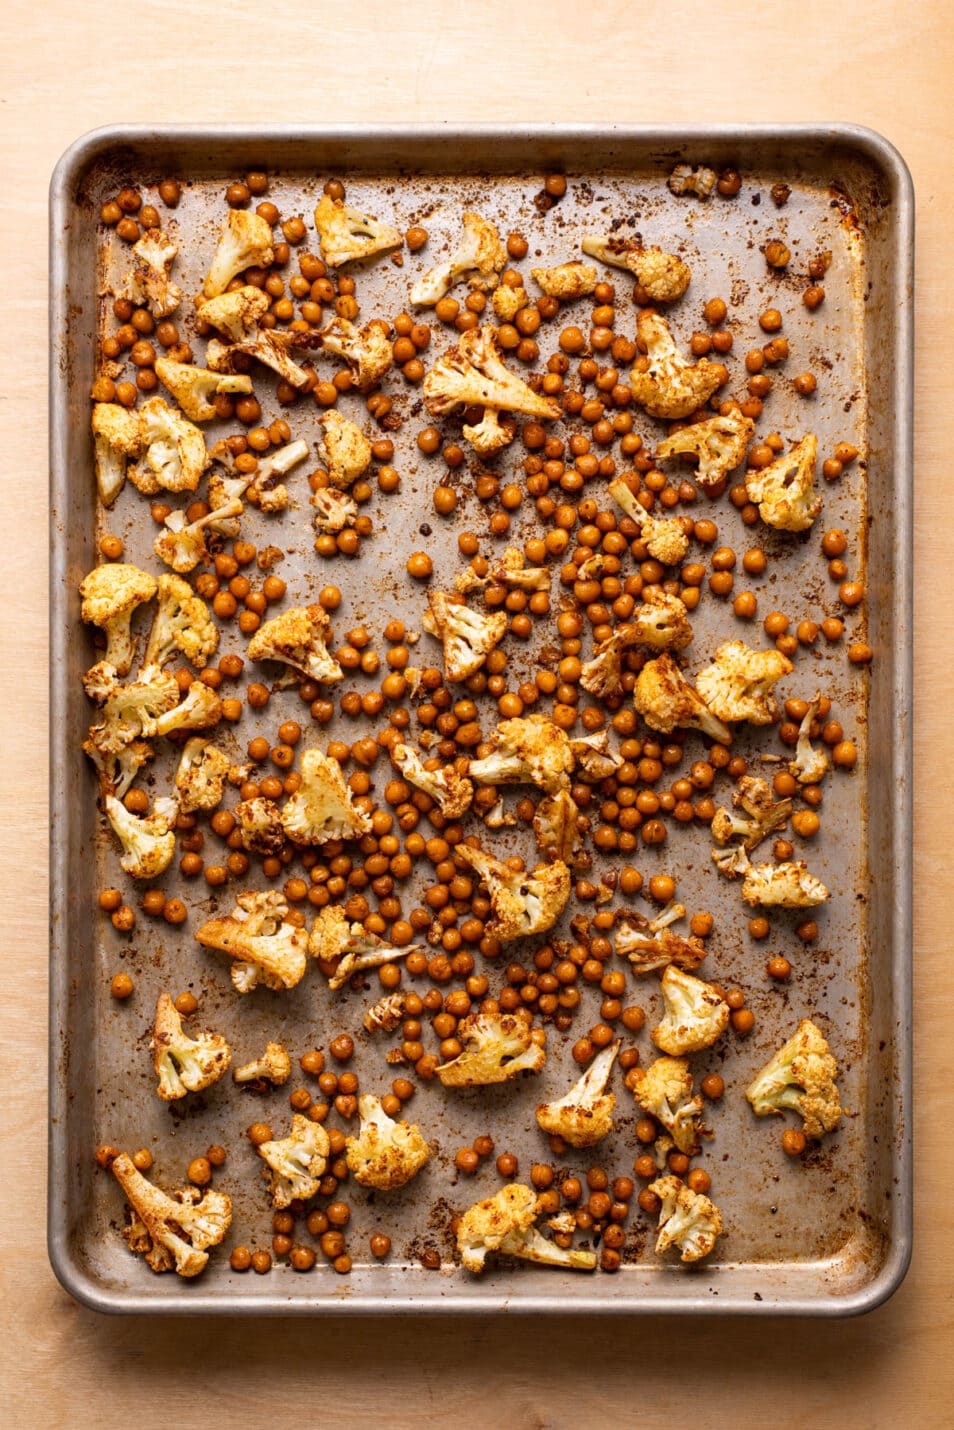 Roasted cauliflower and chickpeas on a baking sheet.